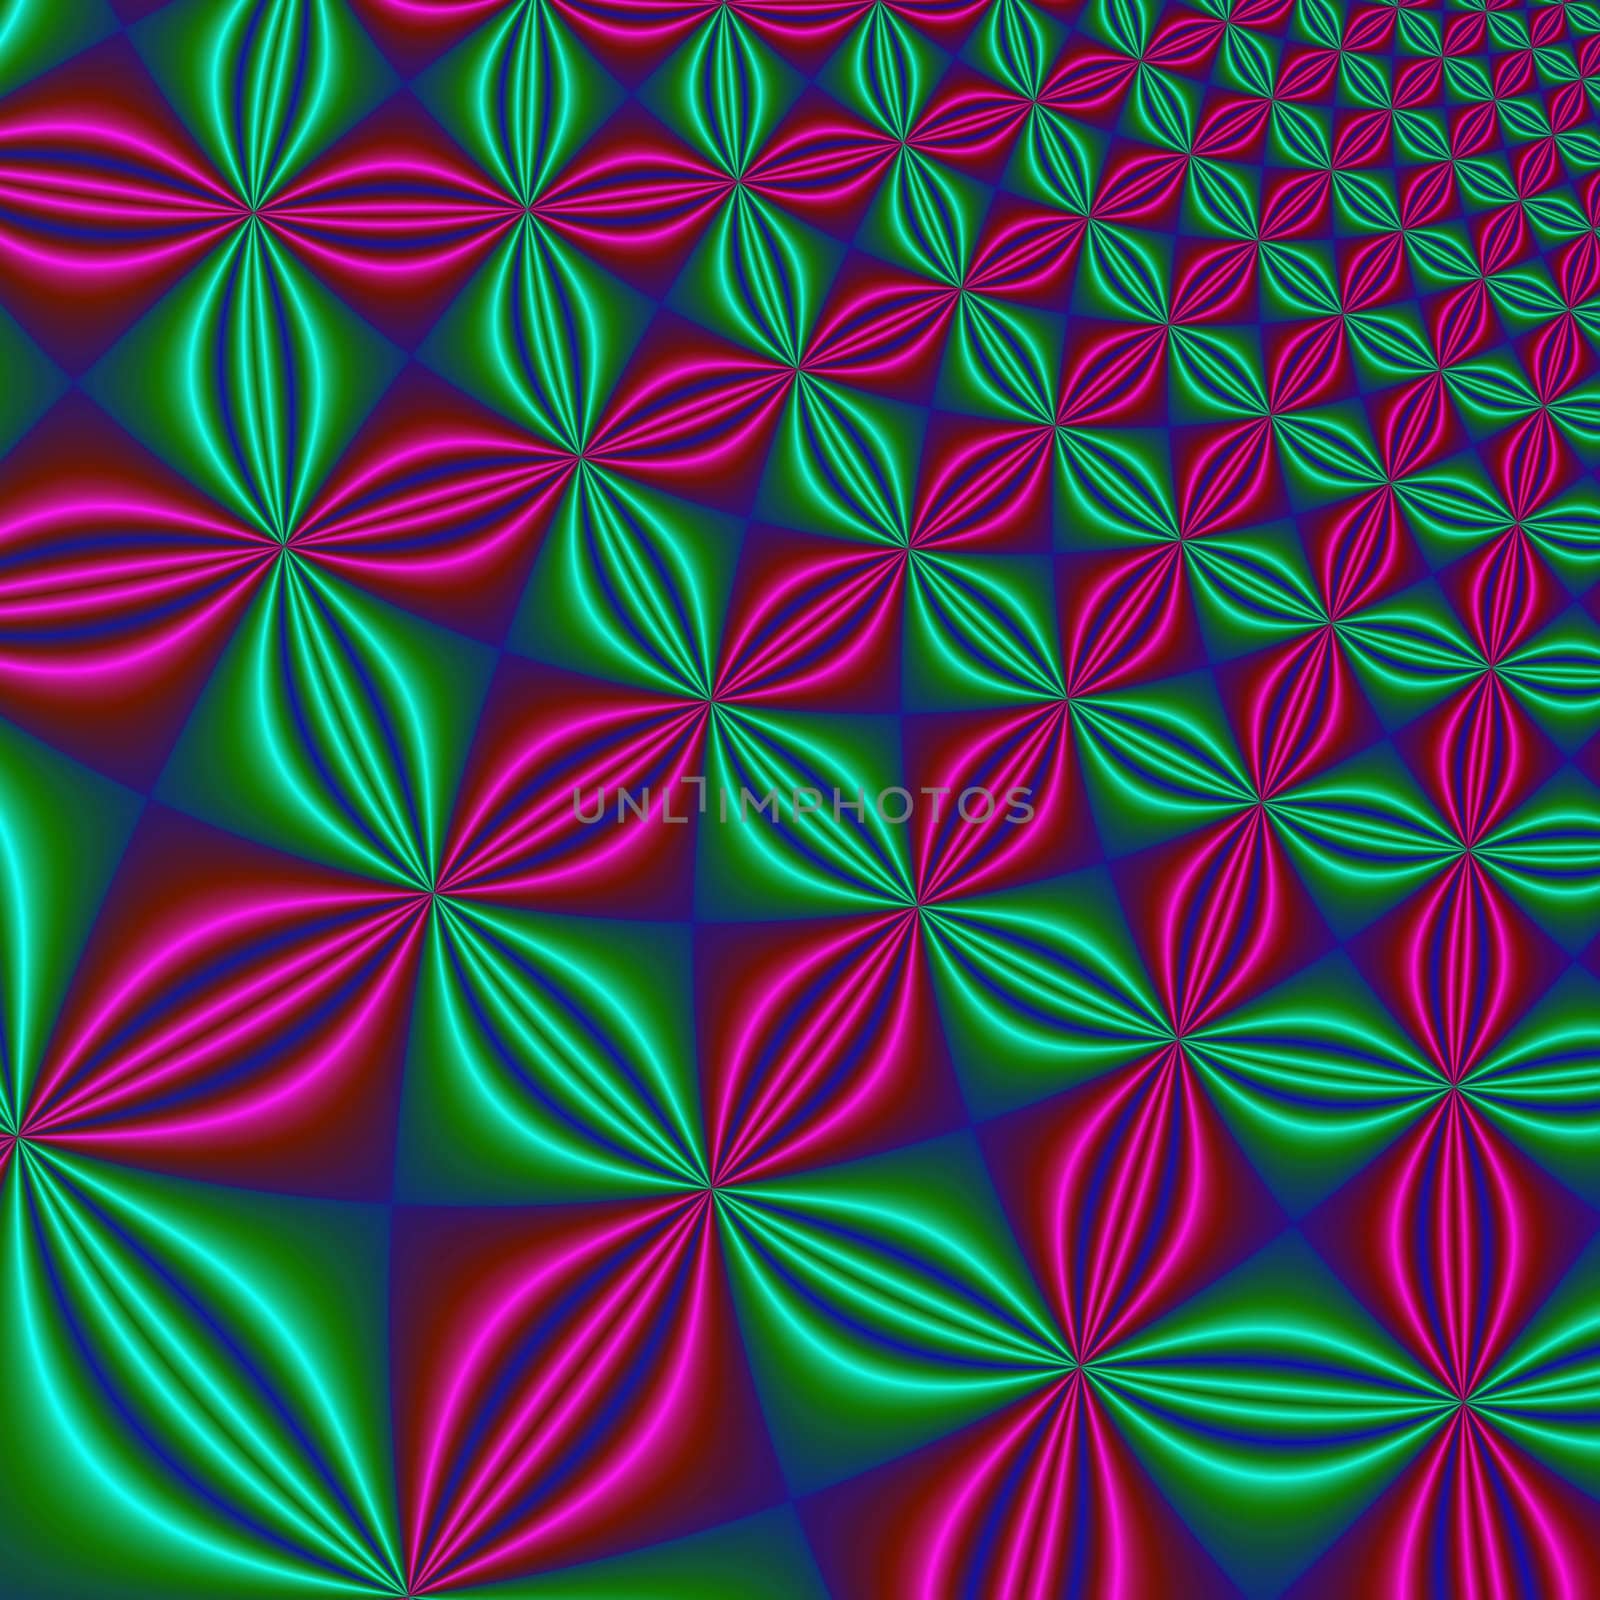 Abstract lilac & green fractal background by klinok